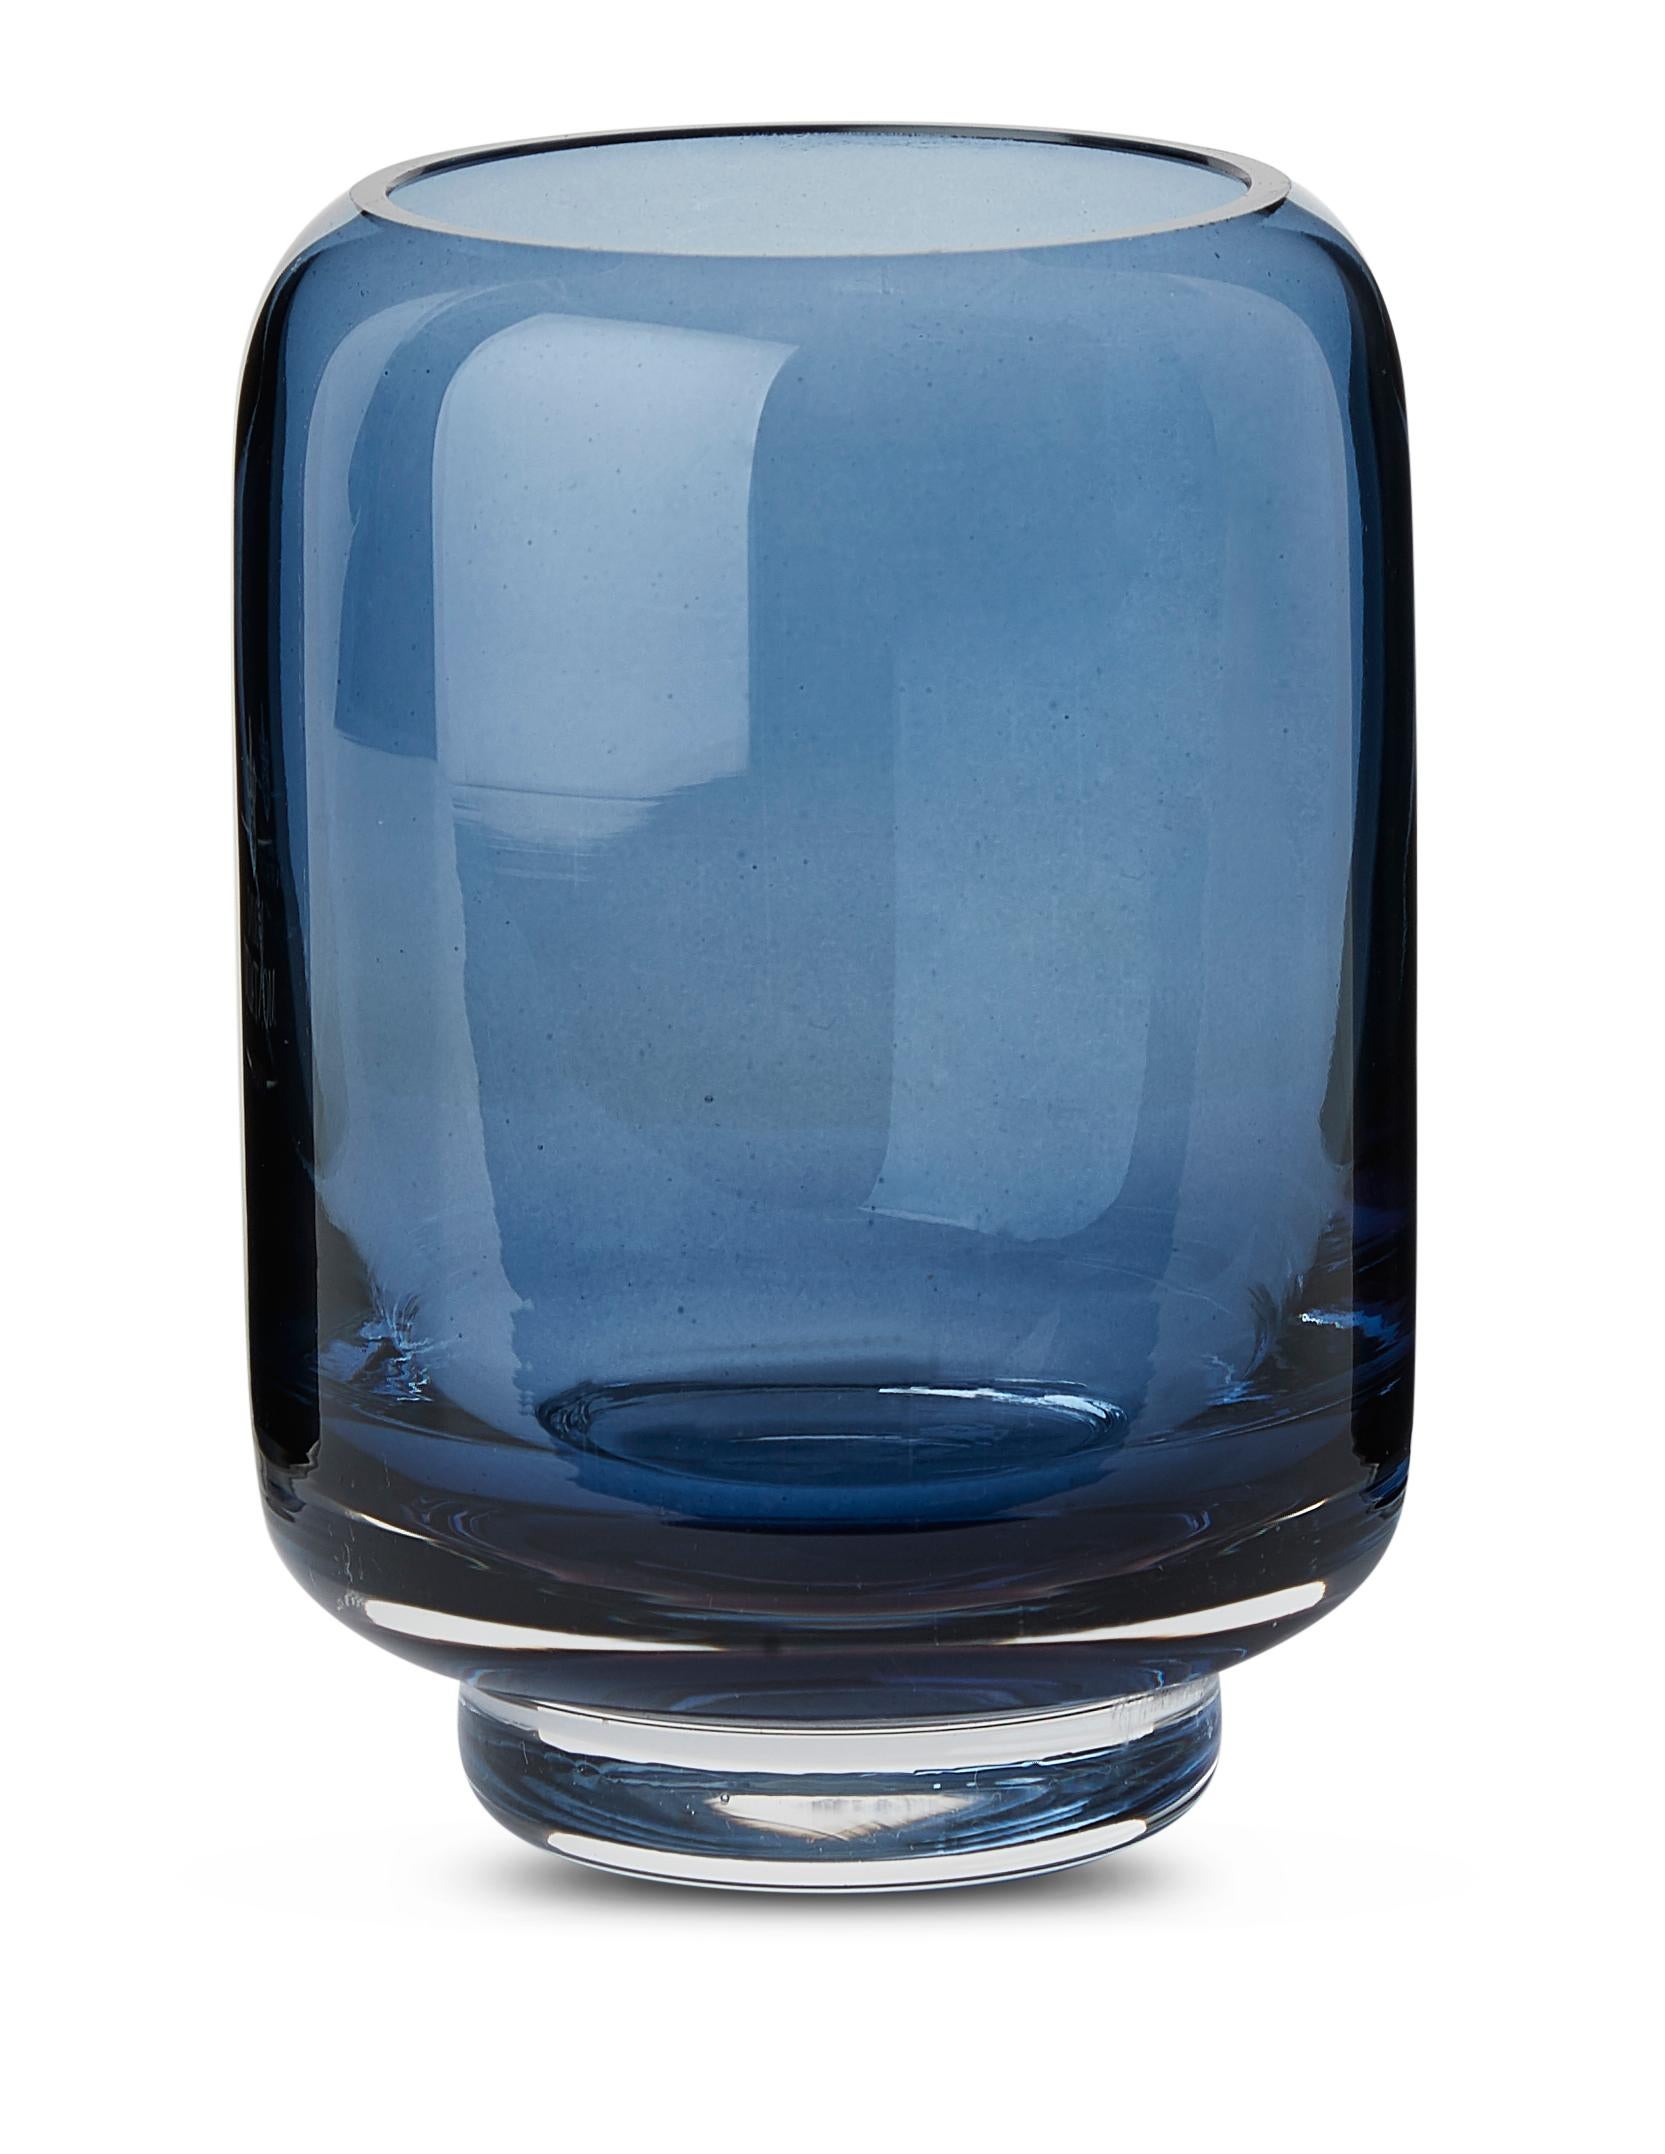 Blue (Petrol Glass) Stack Vase, by Studio Føy from Warm Nordic